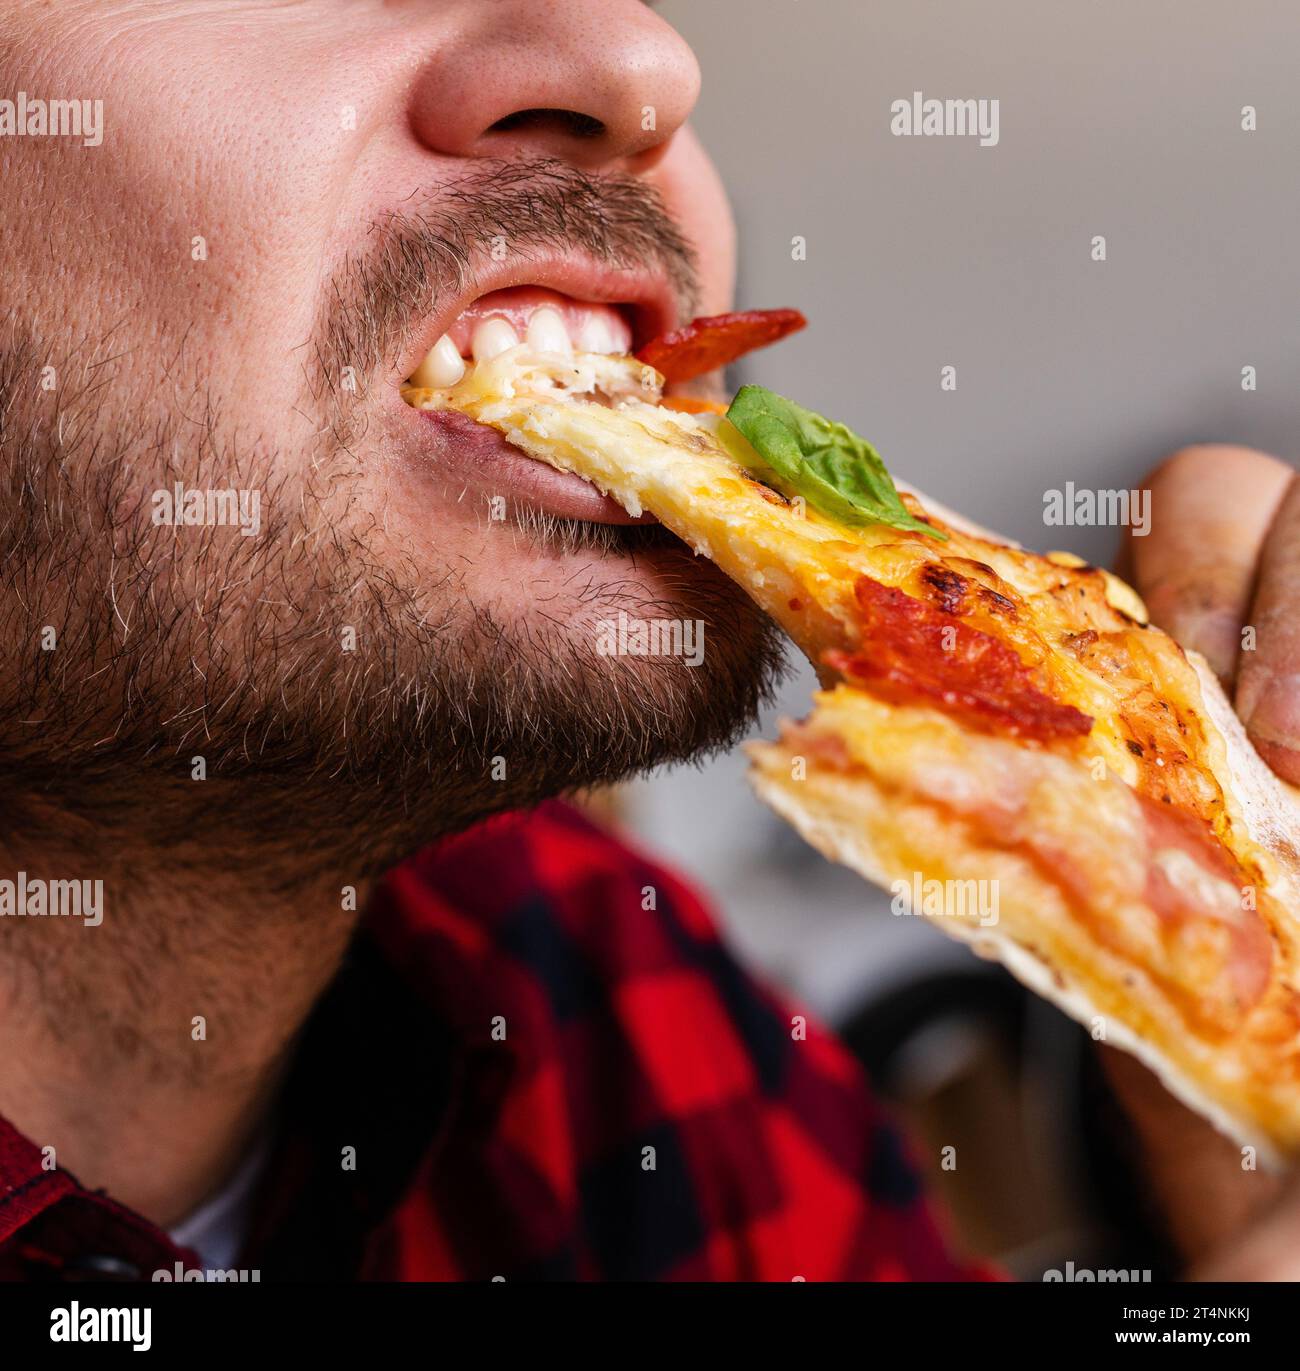 Male bearded person eating pizza close up photography. Stock Photo